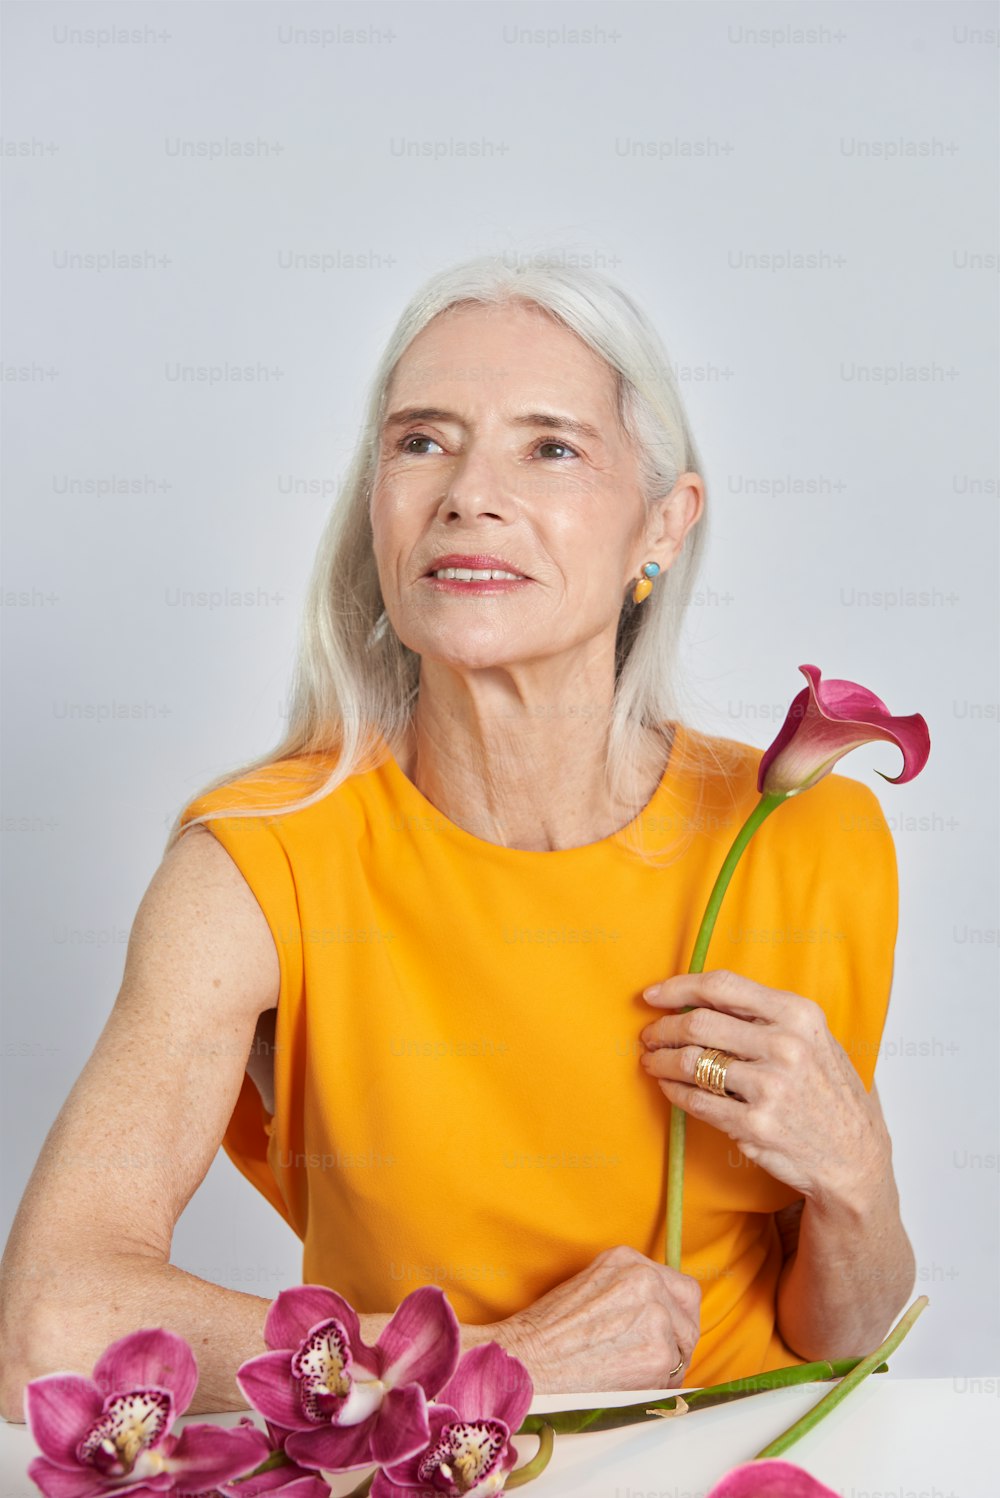 a woman in a yellow shirt holding a flower